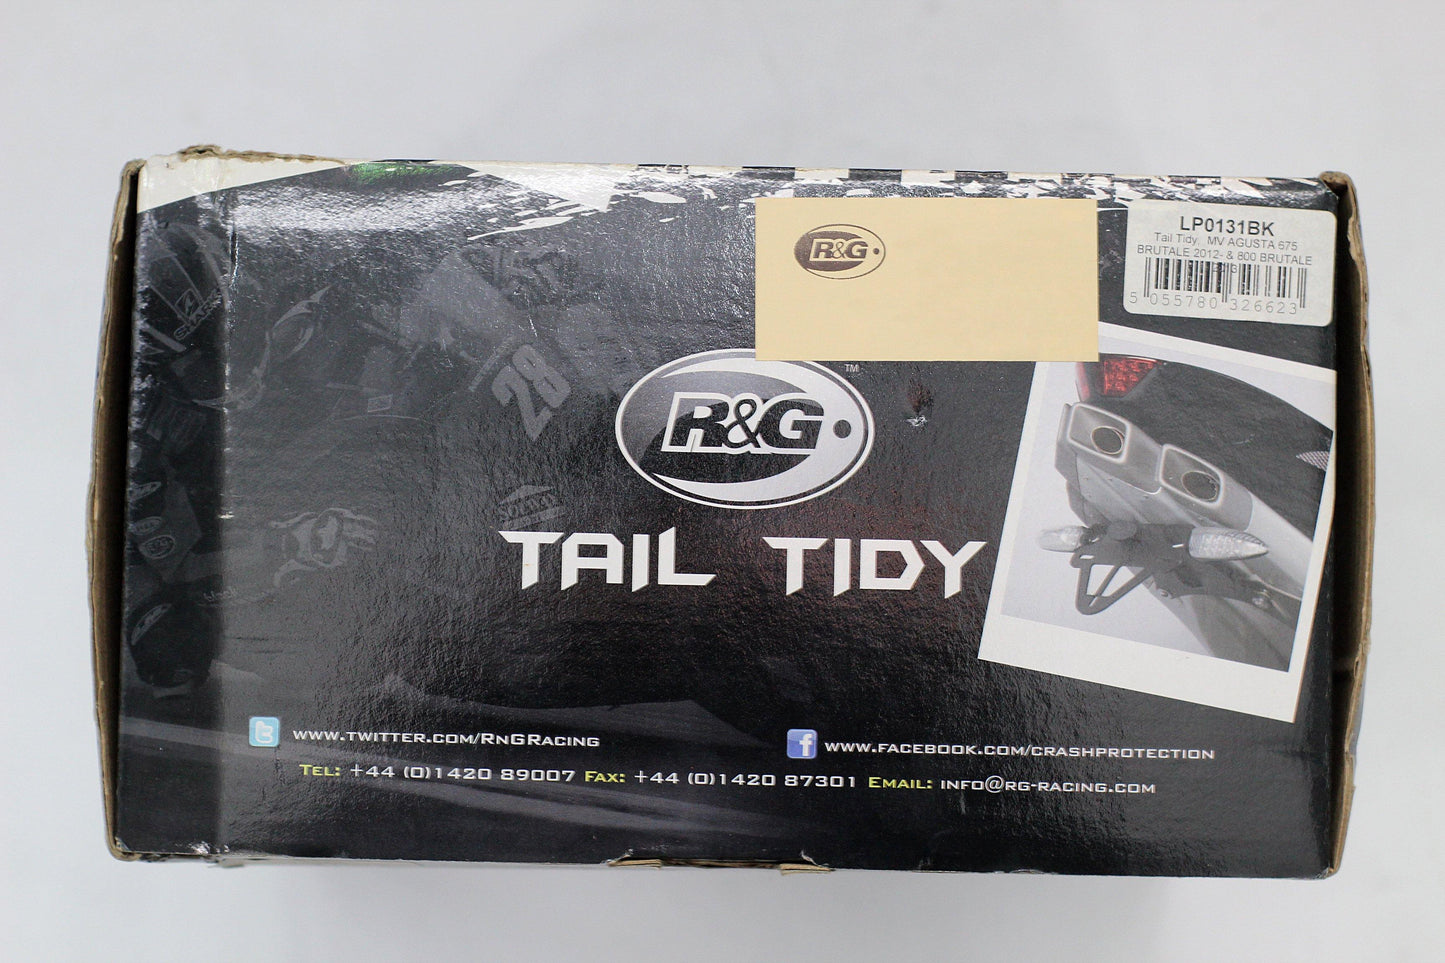 R&G Tail Tidy fits for MV Agusta Brutale 675 ('12-) and MV Brutale 800 ('12-'16) - Durian Bikers